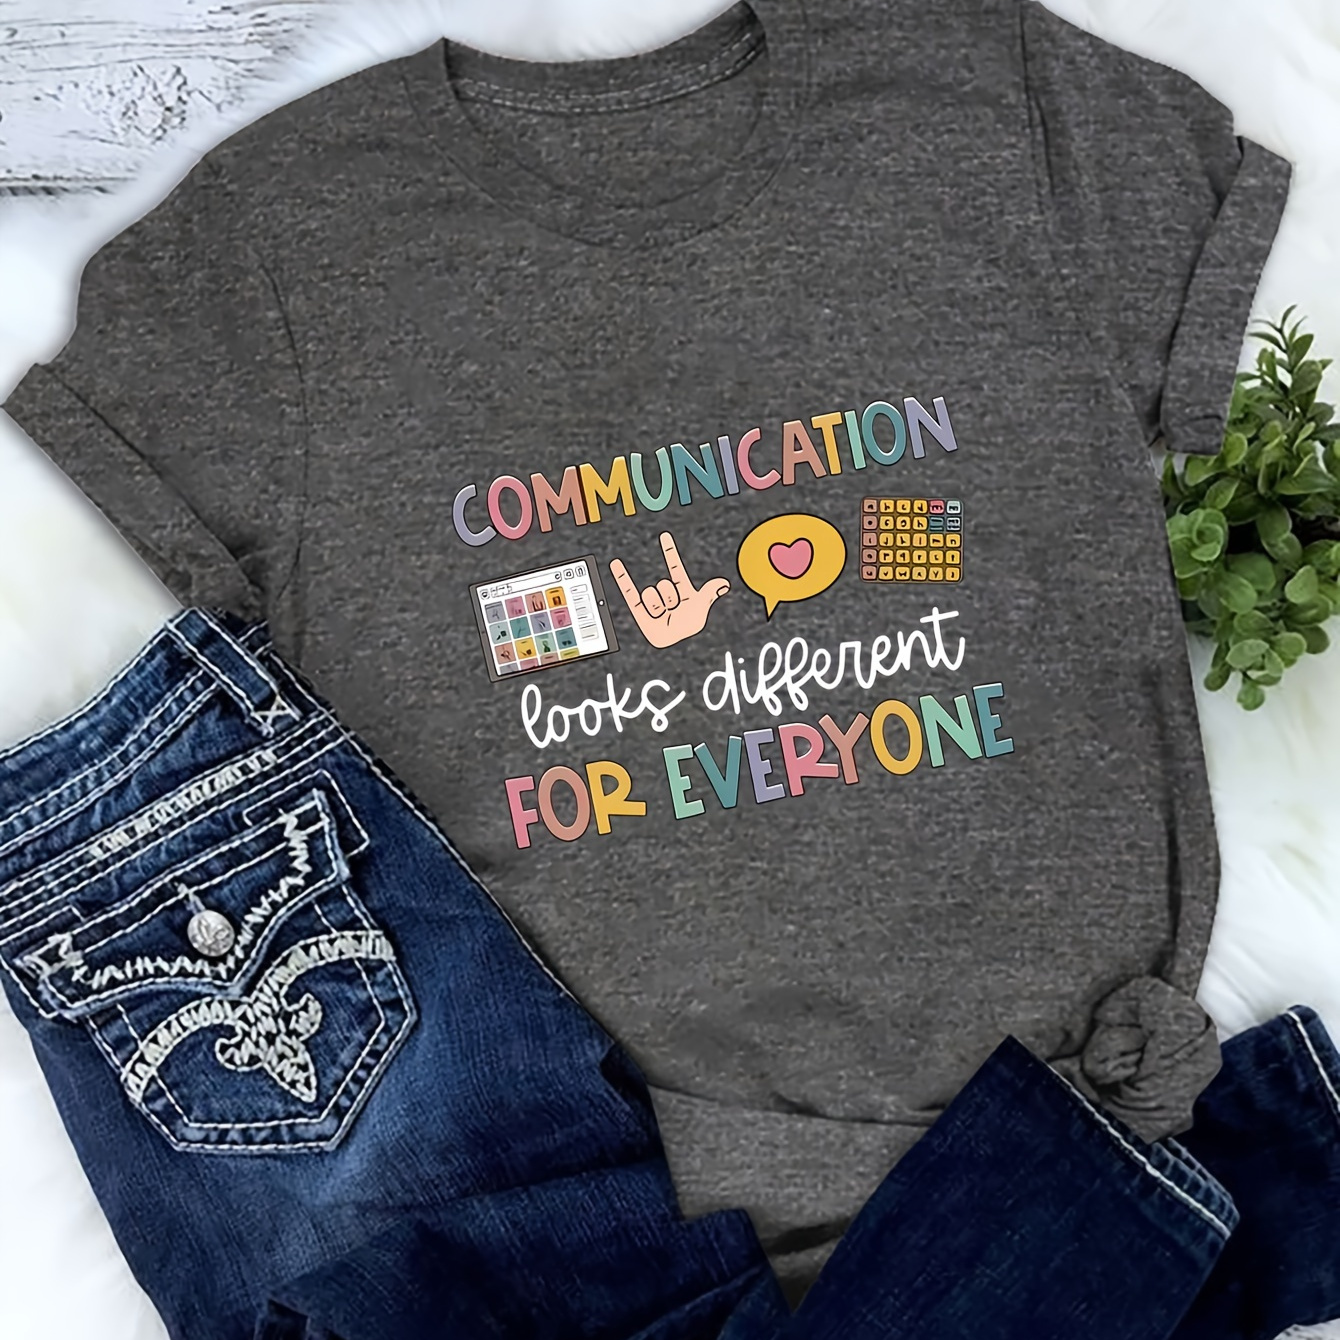 

Plus Size Communication Print T-shirt, Casual Short Sleeve Crew Neck Top For Spring & Summer, Women's Plus Size Clothing